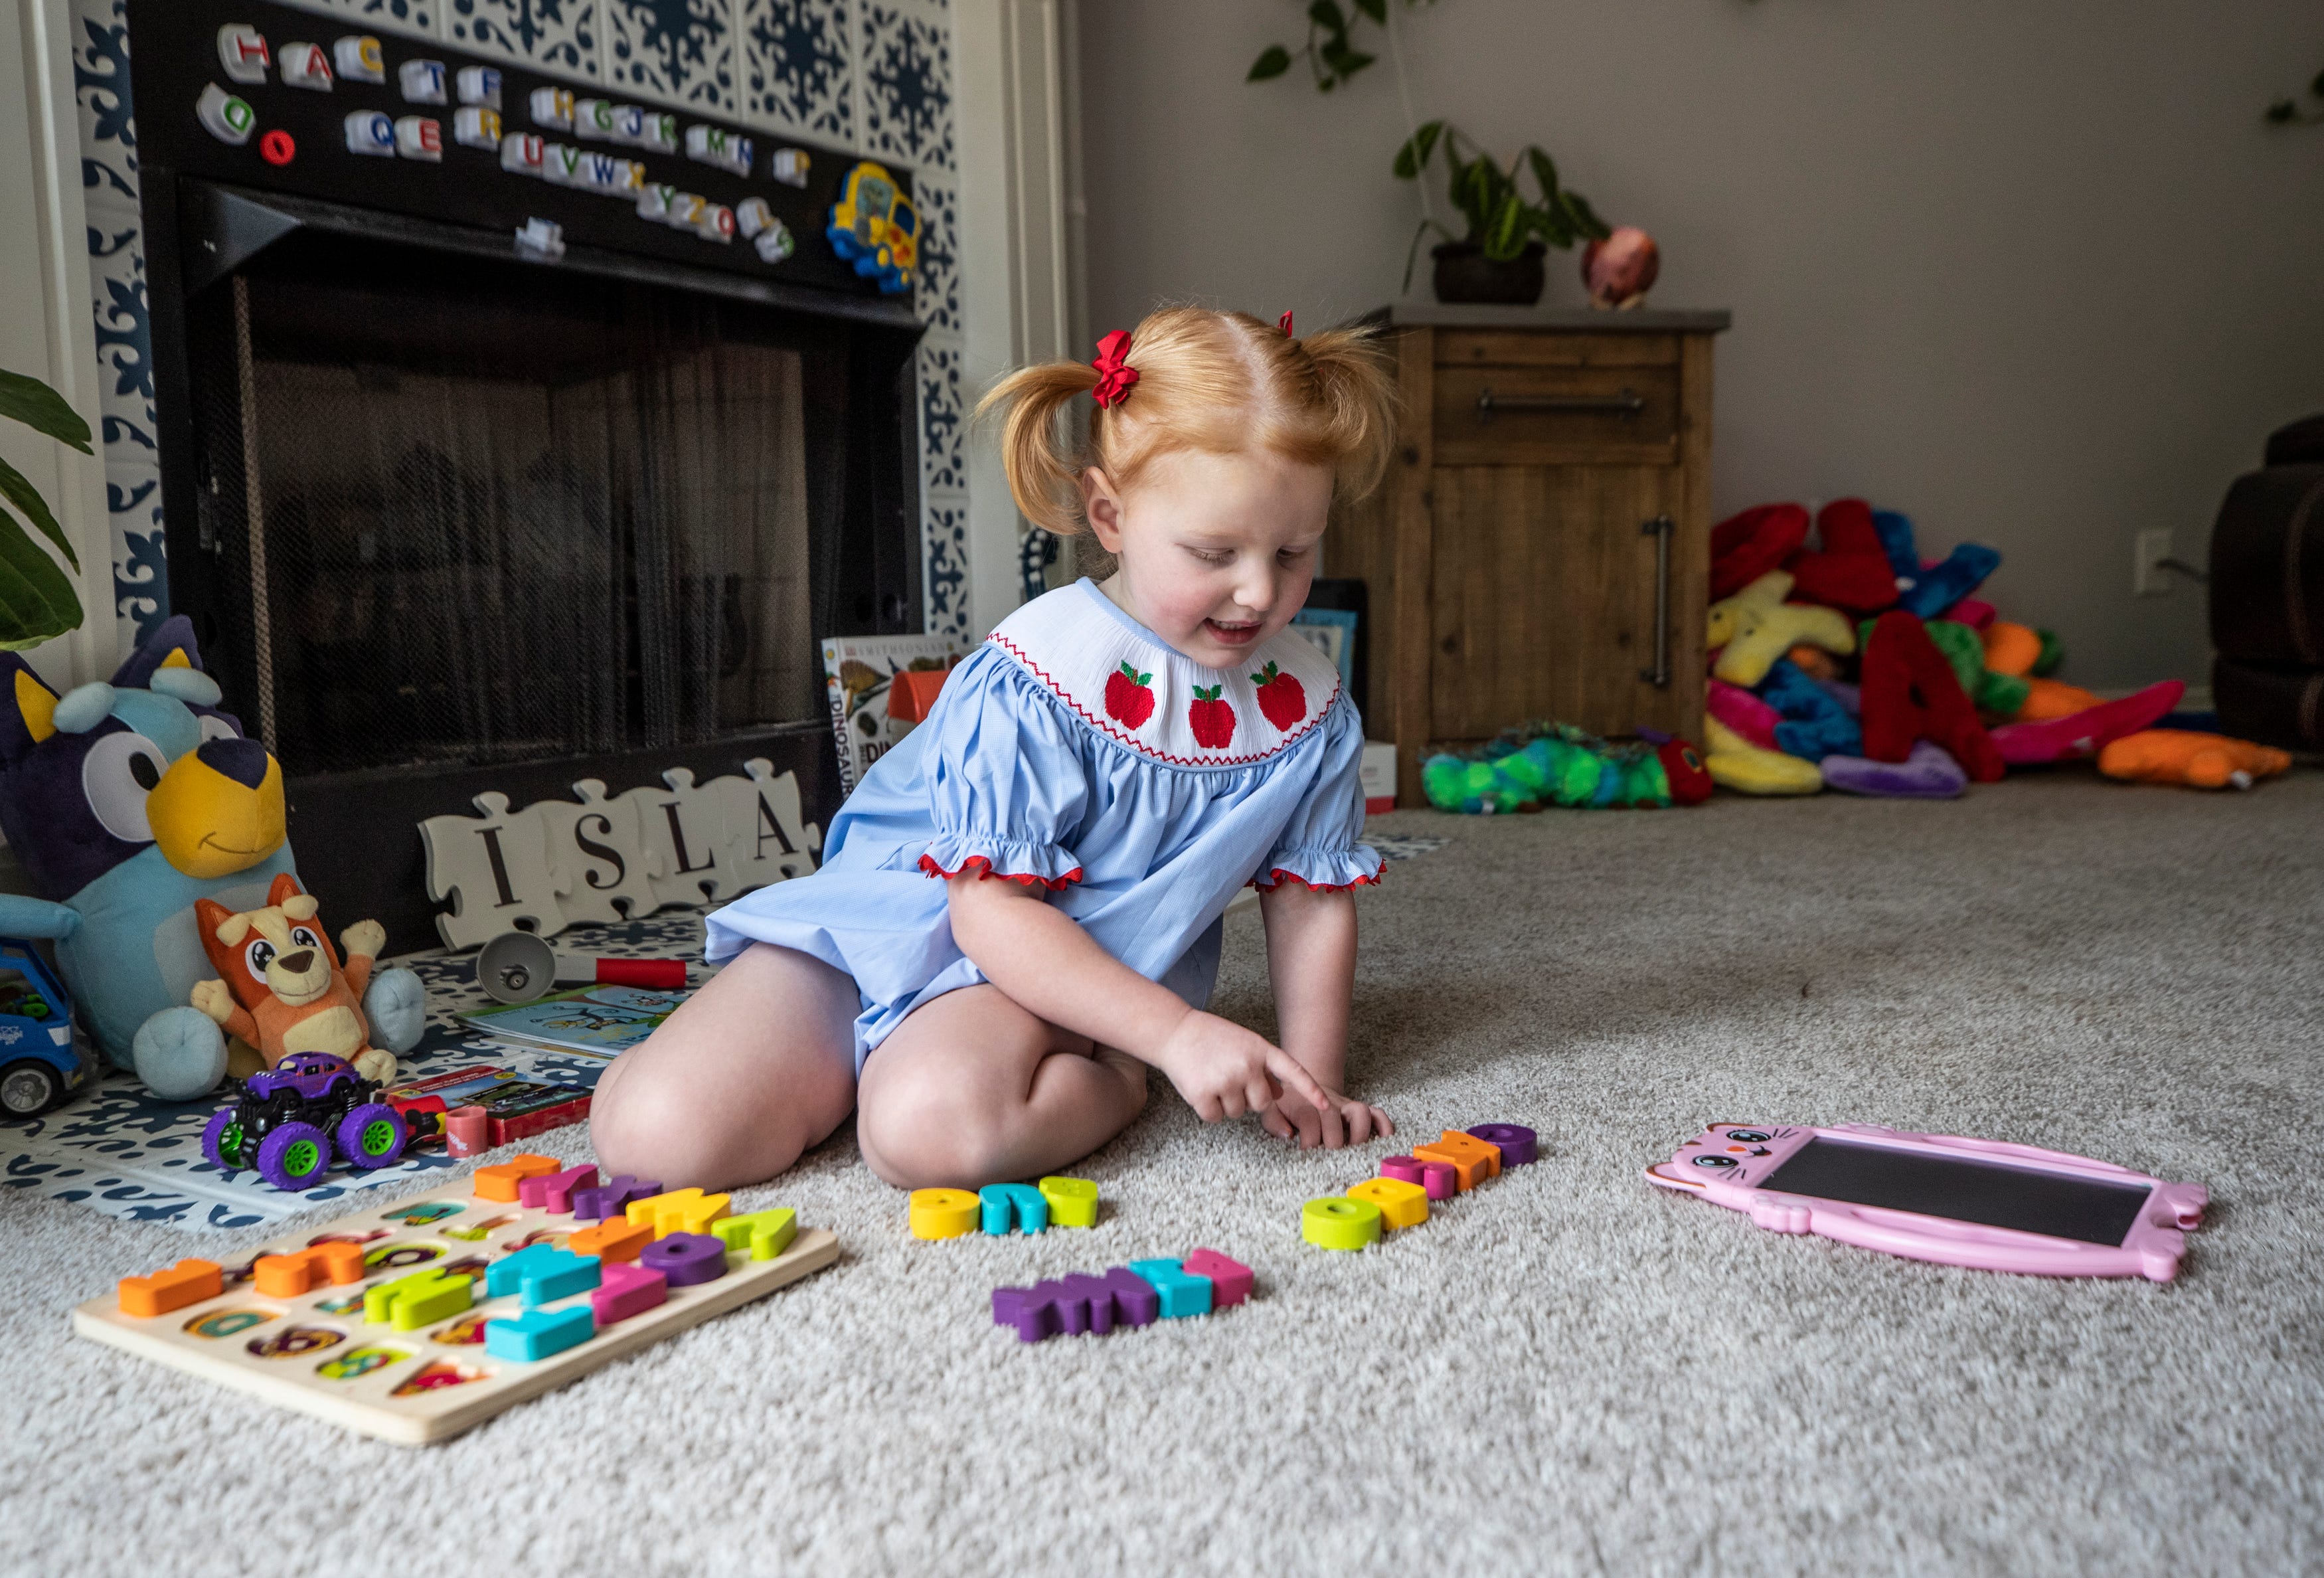 Oldham County 2-year-old becomes the youngest member of high IQ club Mensa International